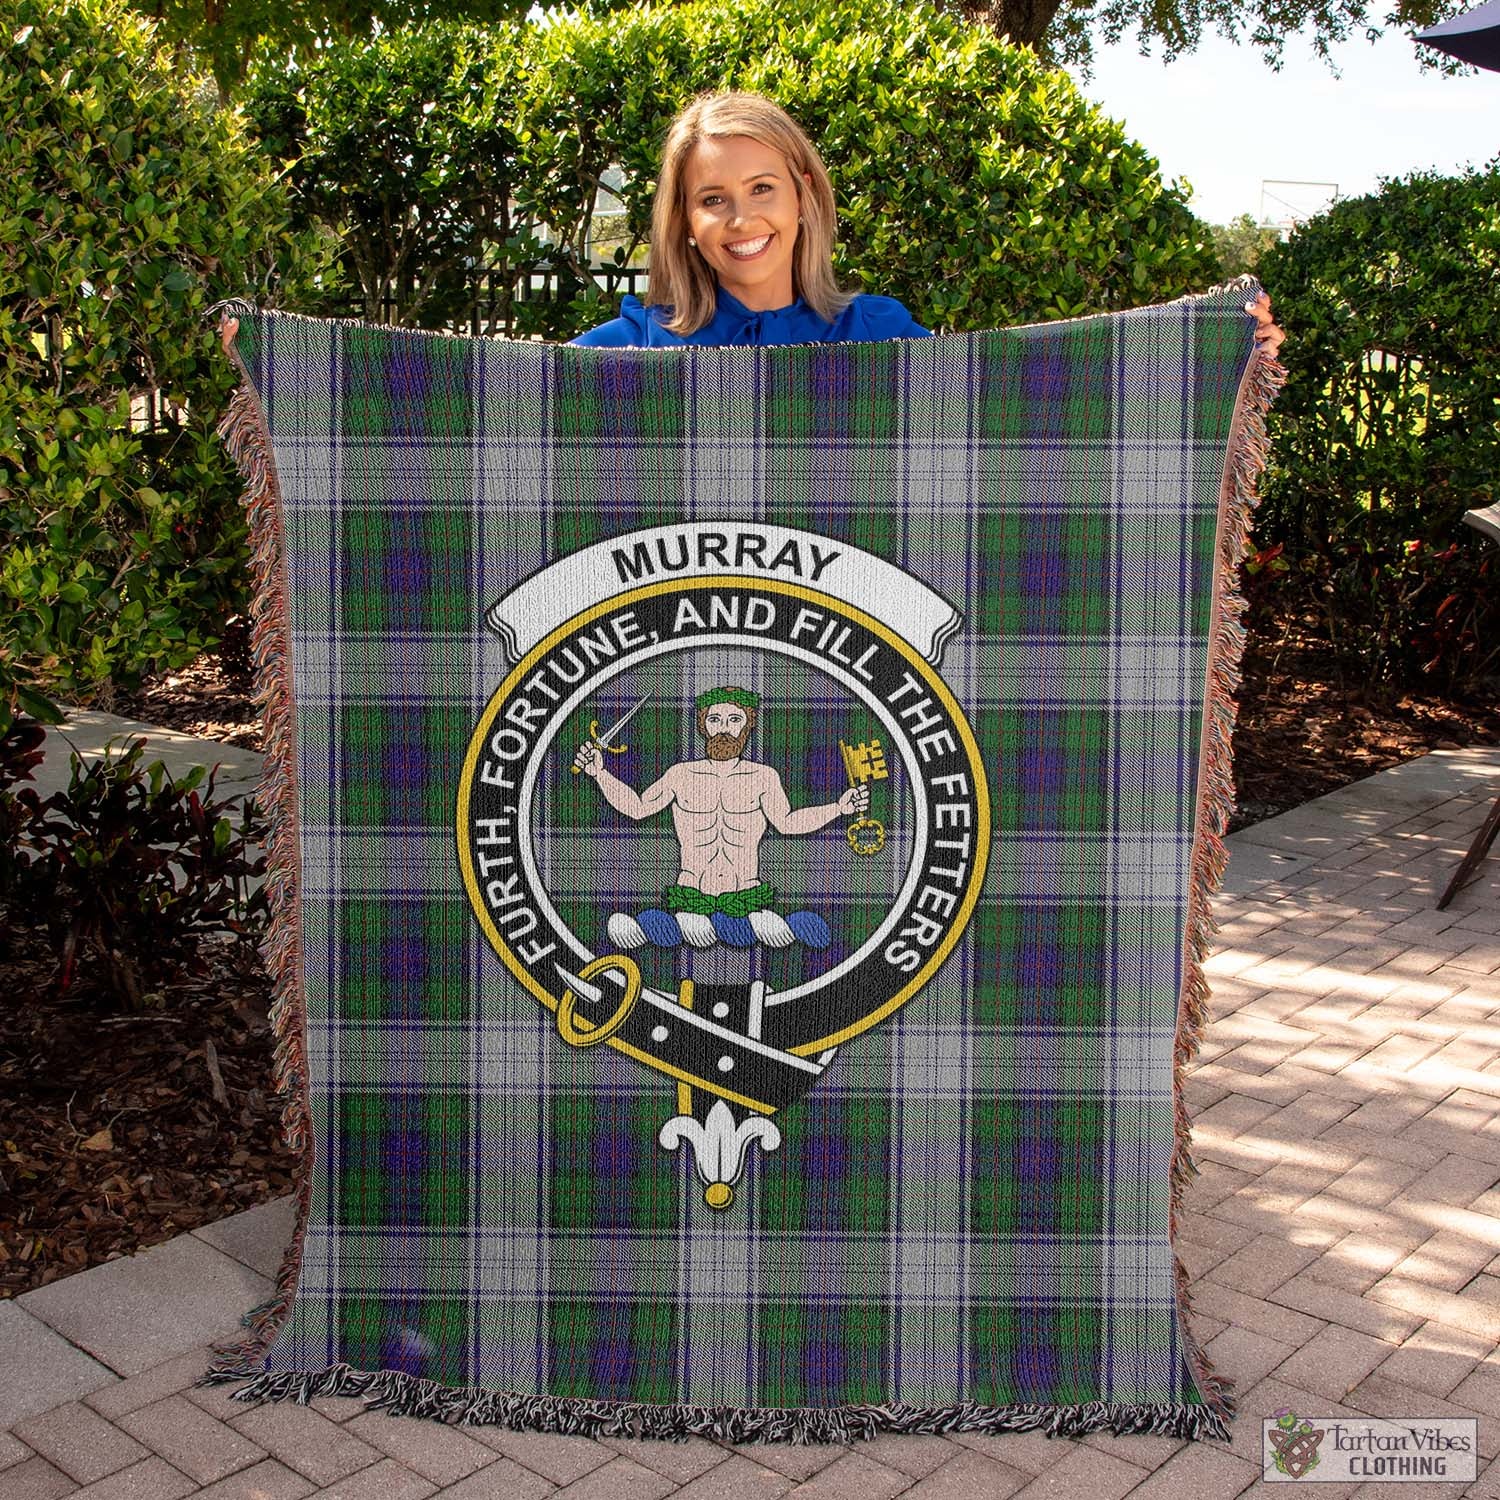 Tartan Vibes Clothing Murray of Atholl Dress Tartan Woven Blanket with Family Crest